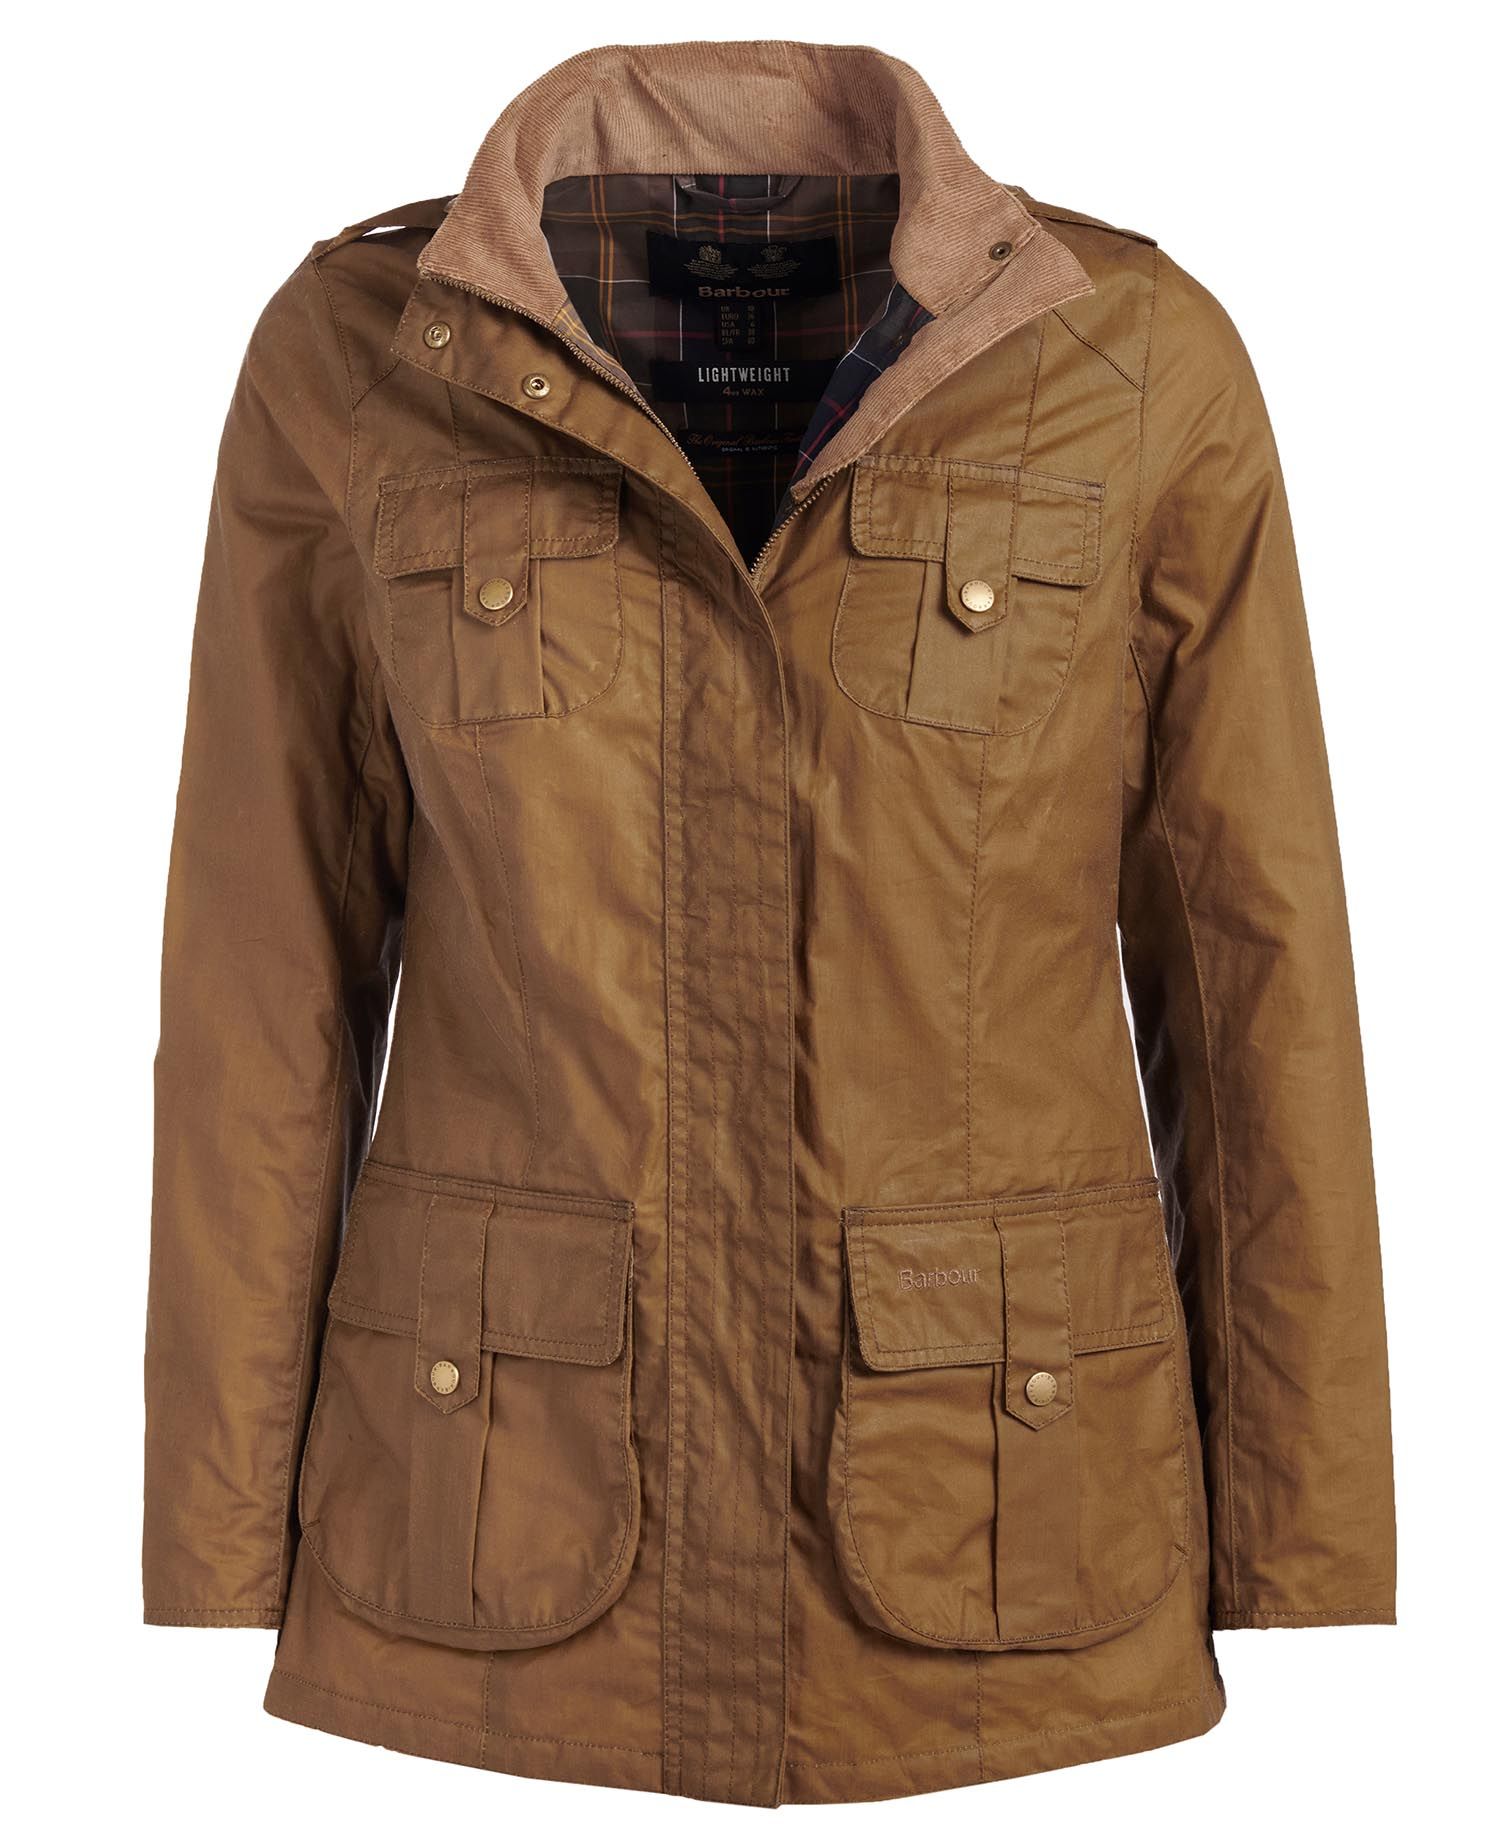 Barbour Lightweight Defence Waxed Cotton Jacket